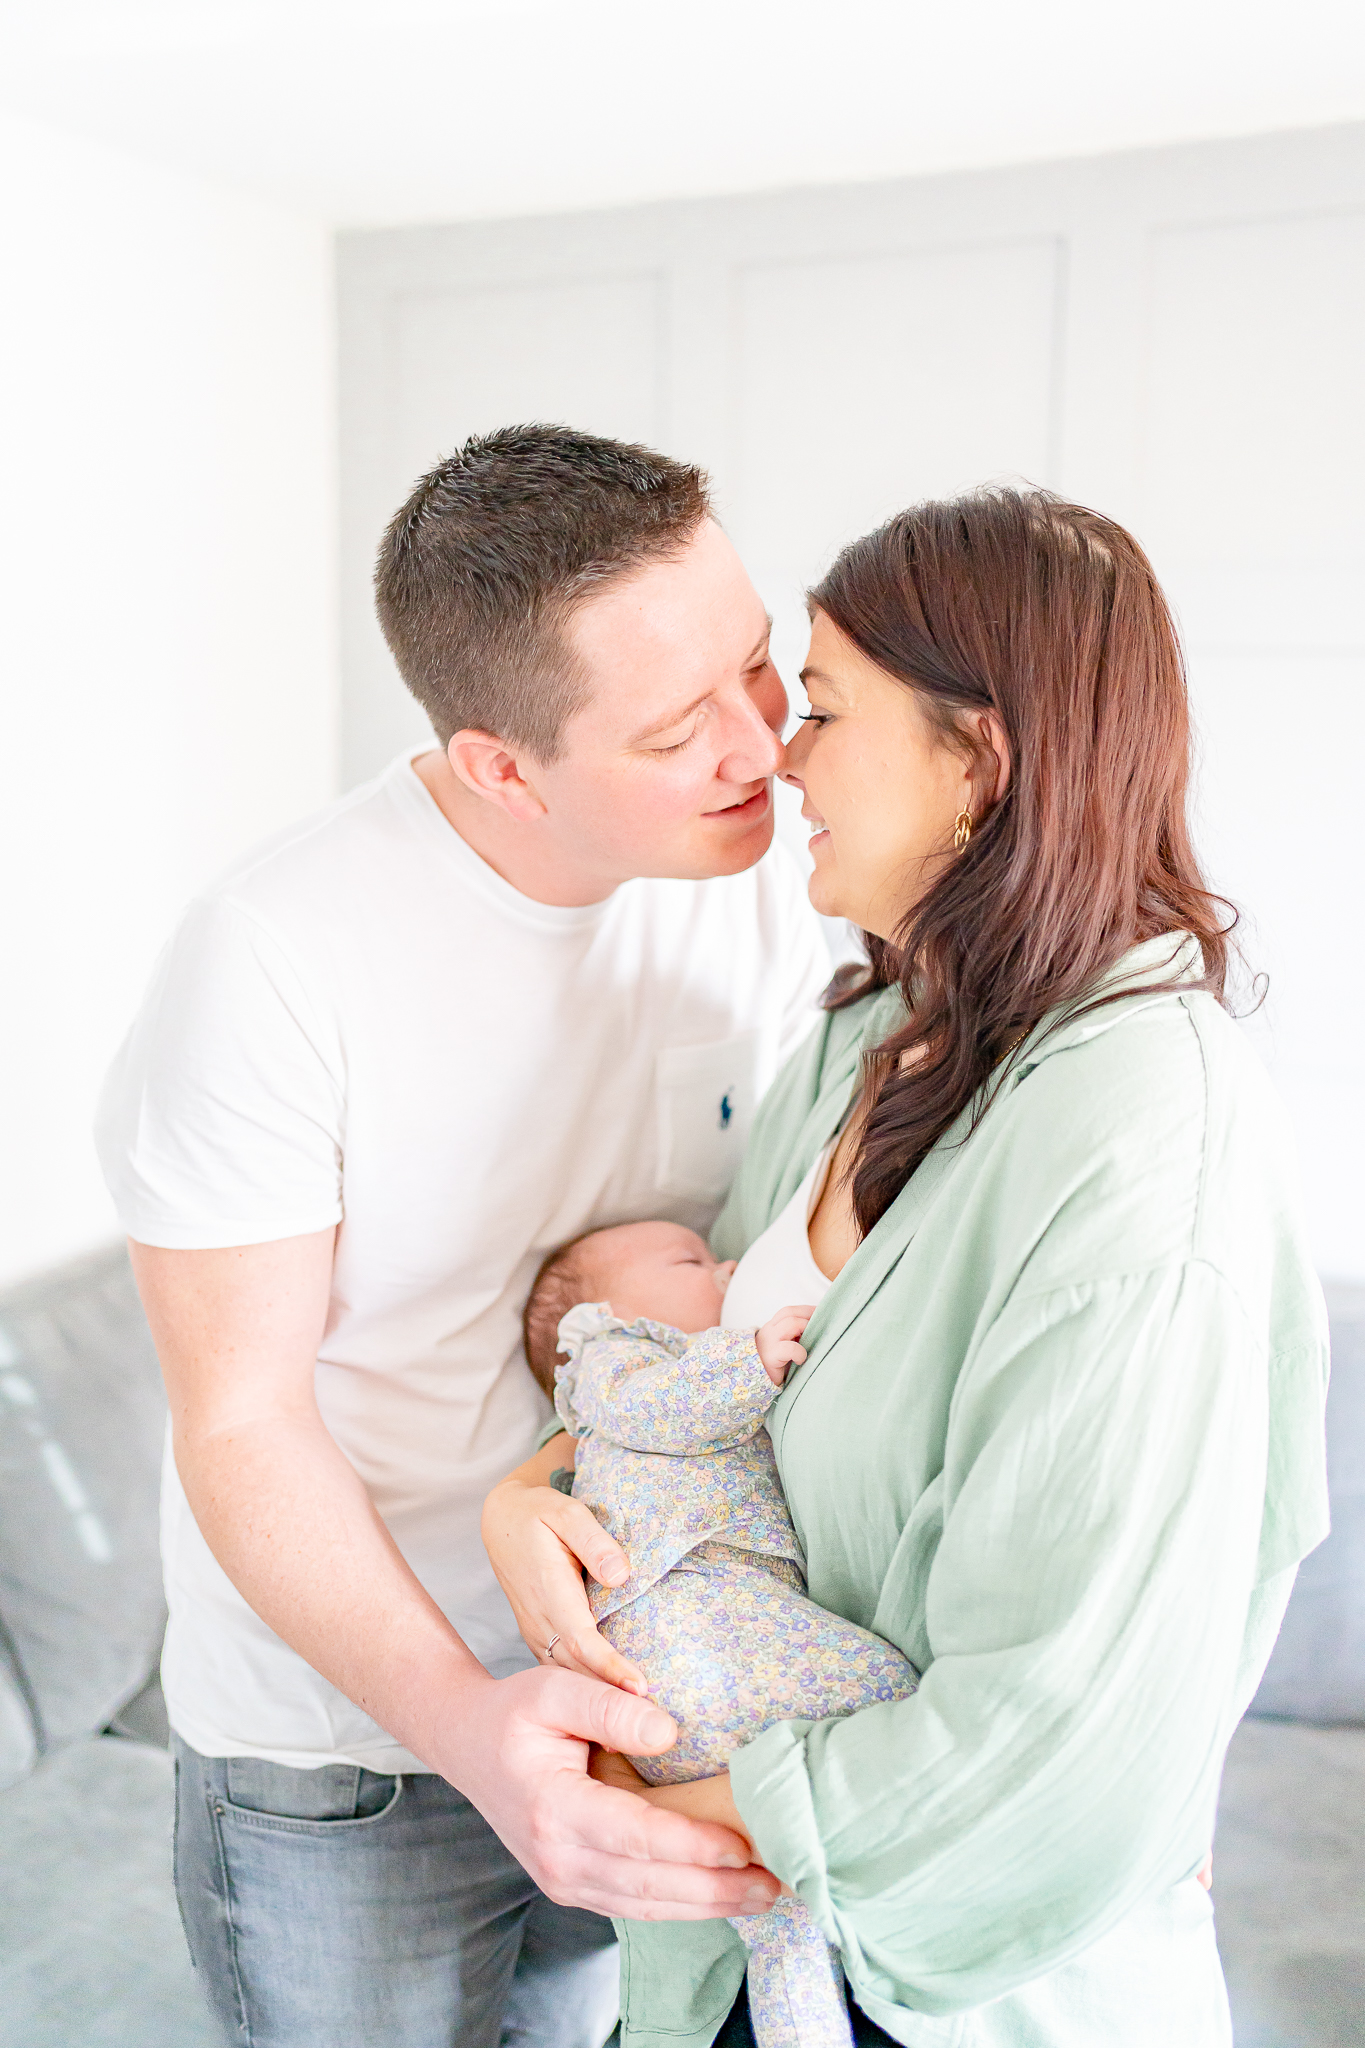 Mum and dad sharing a kiss while holding their new born